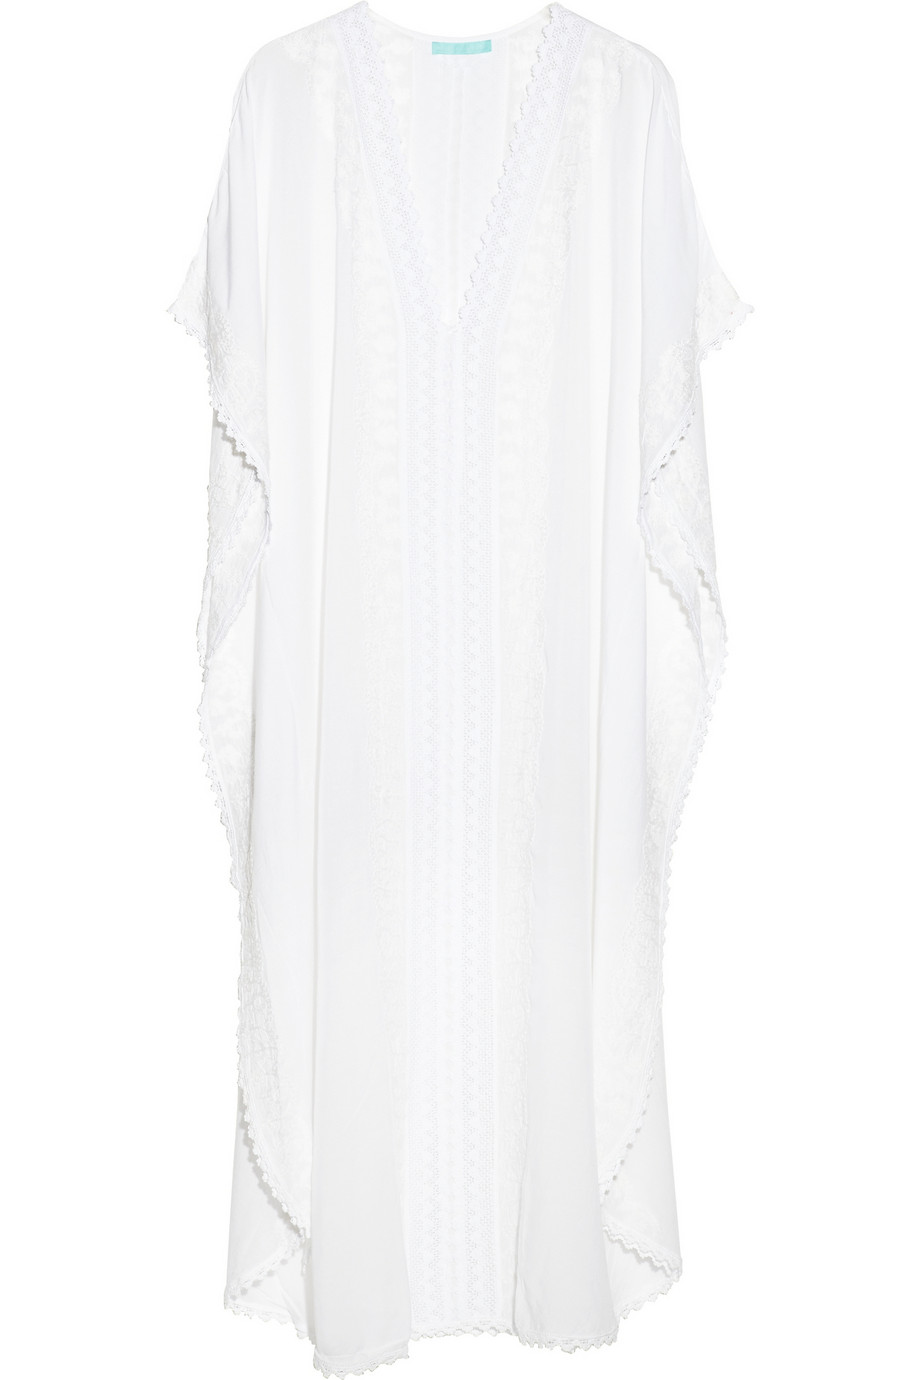 Melissa odabash Robyn Embroidered Voile Kaftan in White | Lyst